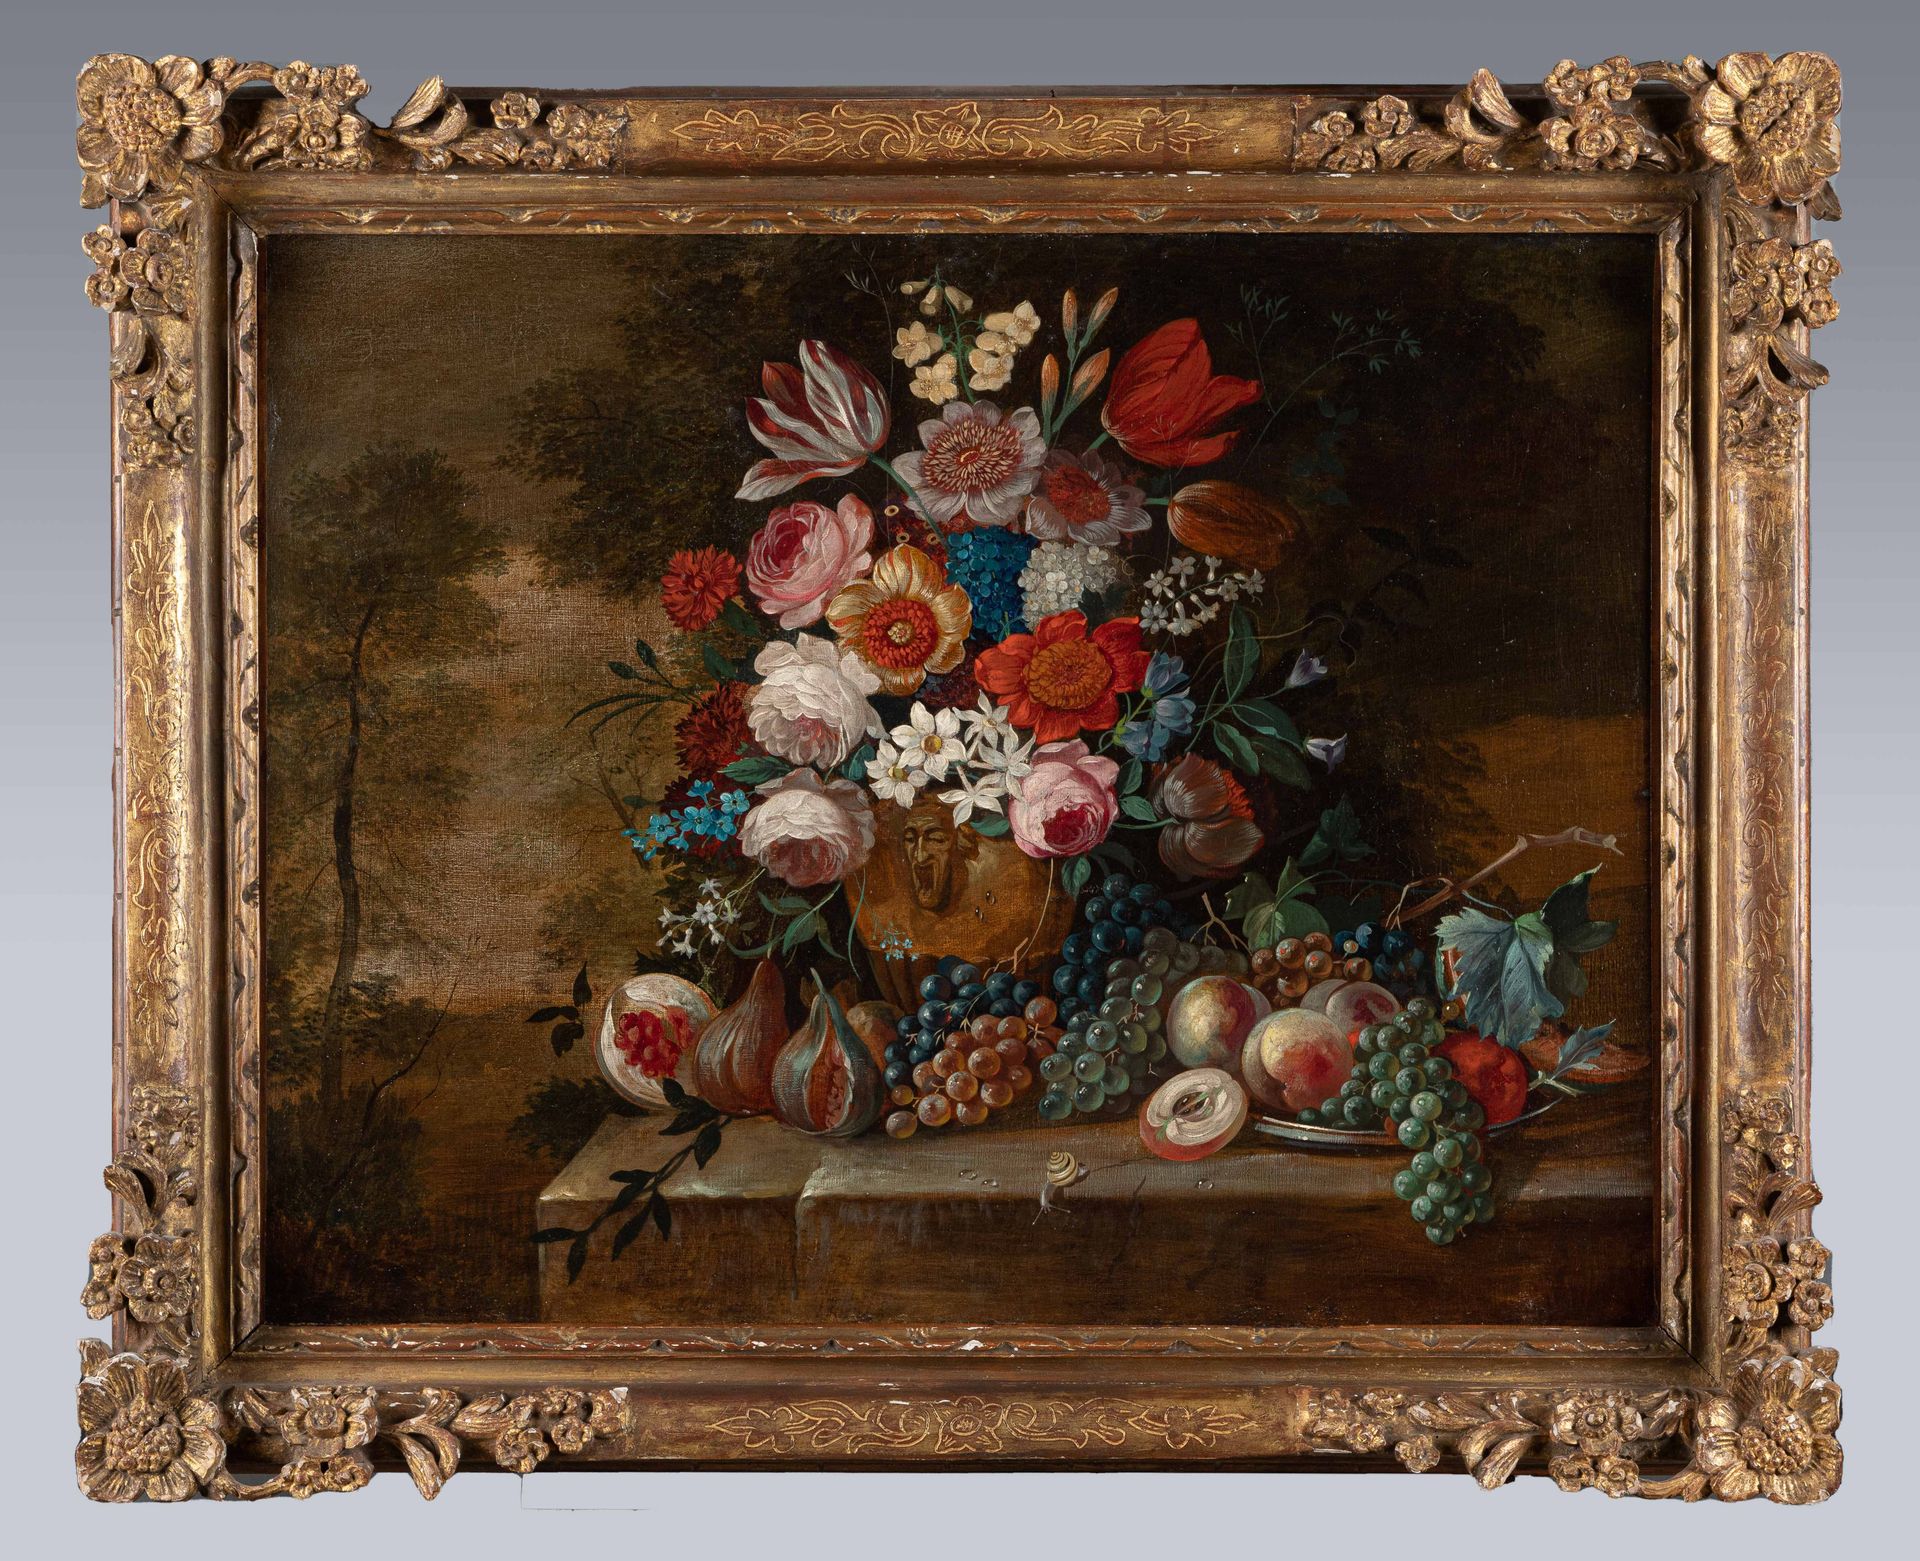 Null Dutch school in the 17th century style
Still life with flowers and fruit
Pa&hellip;